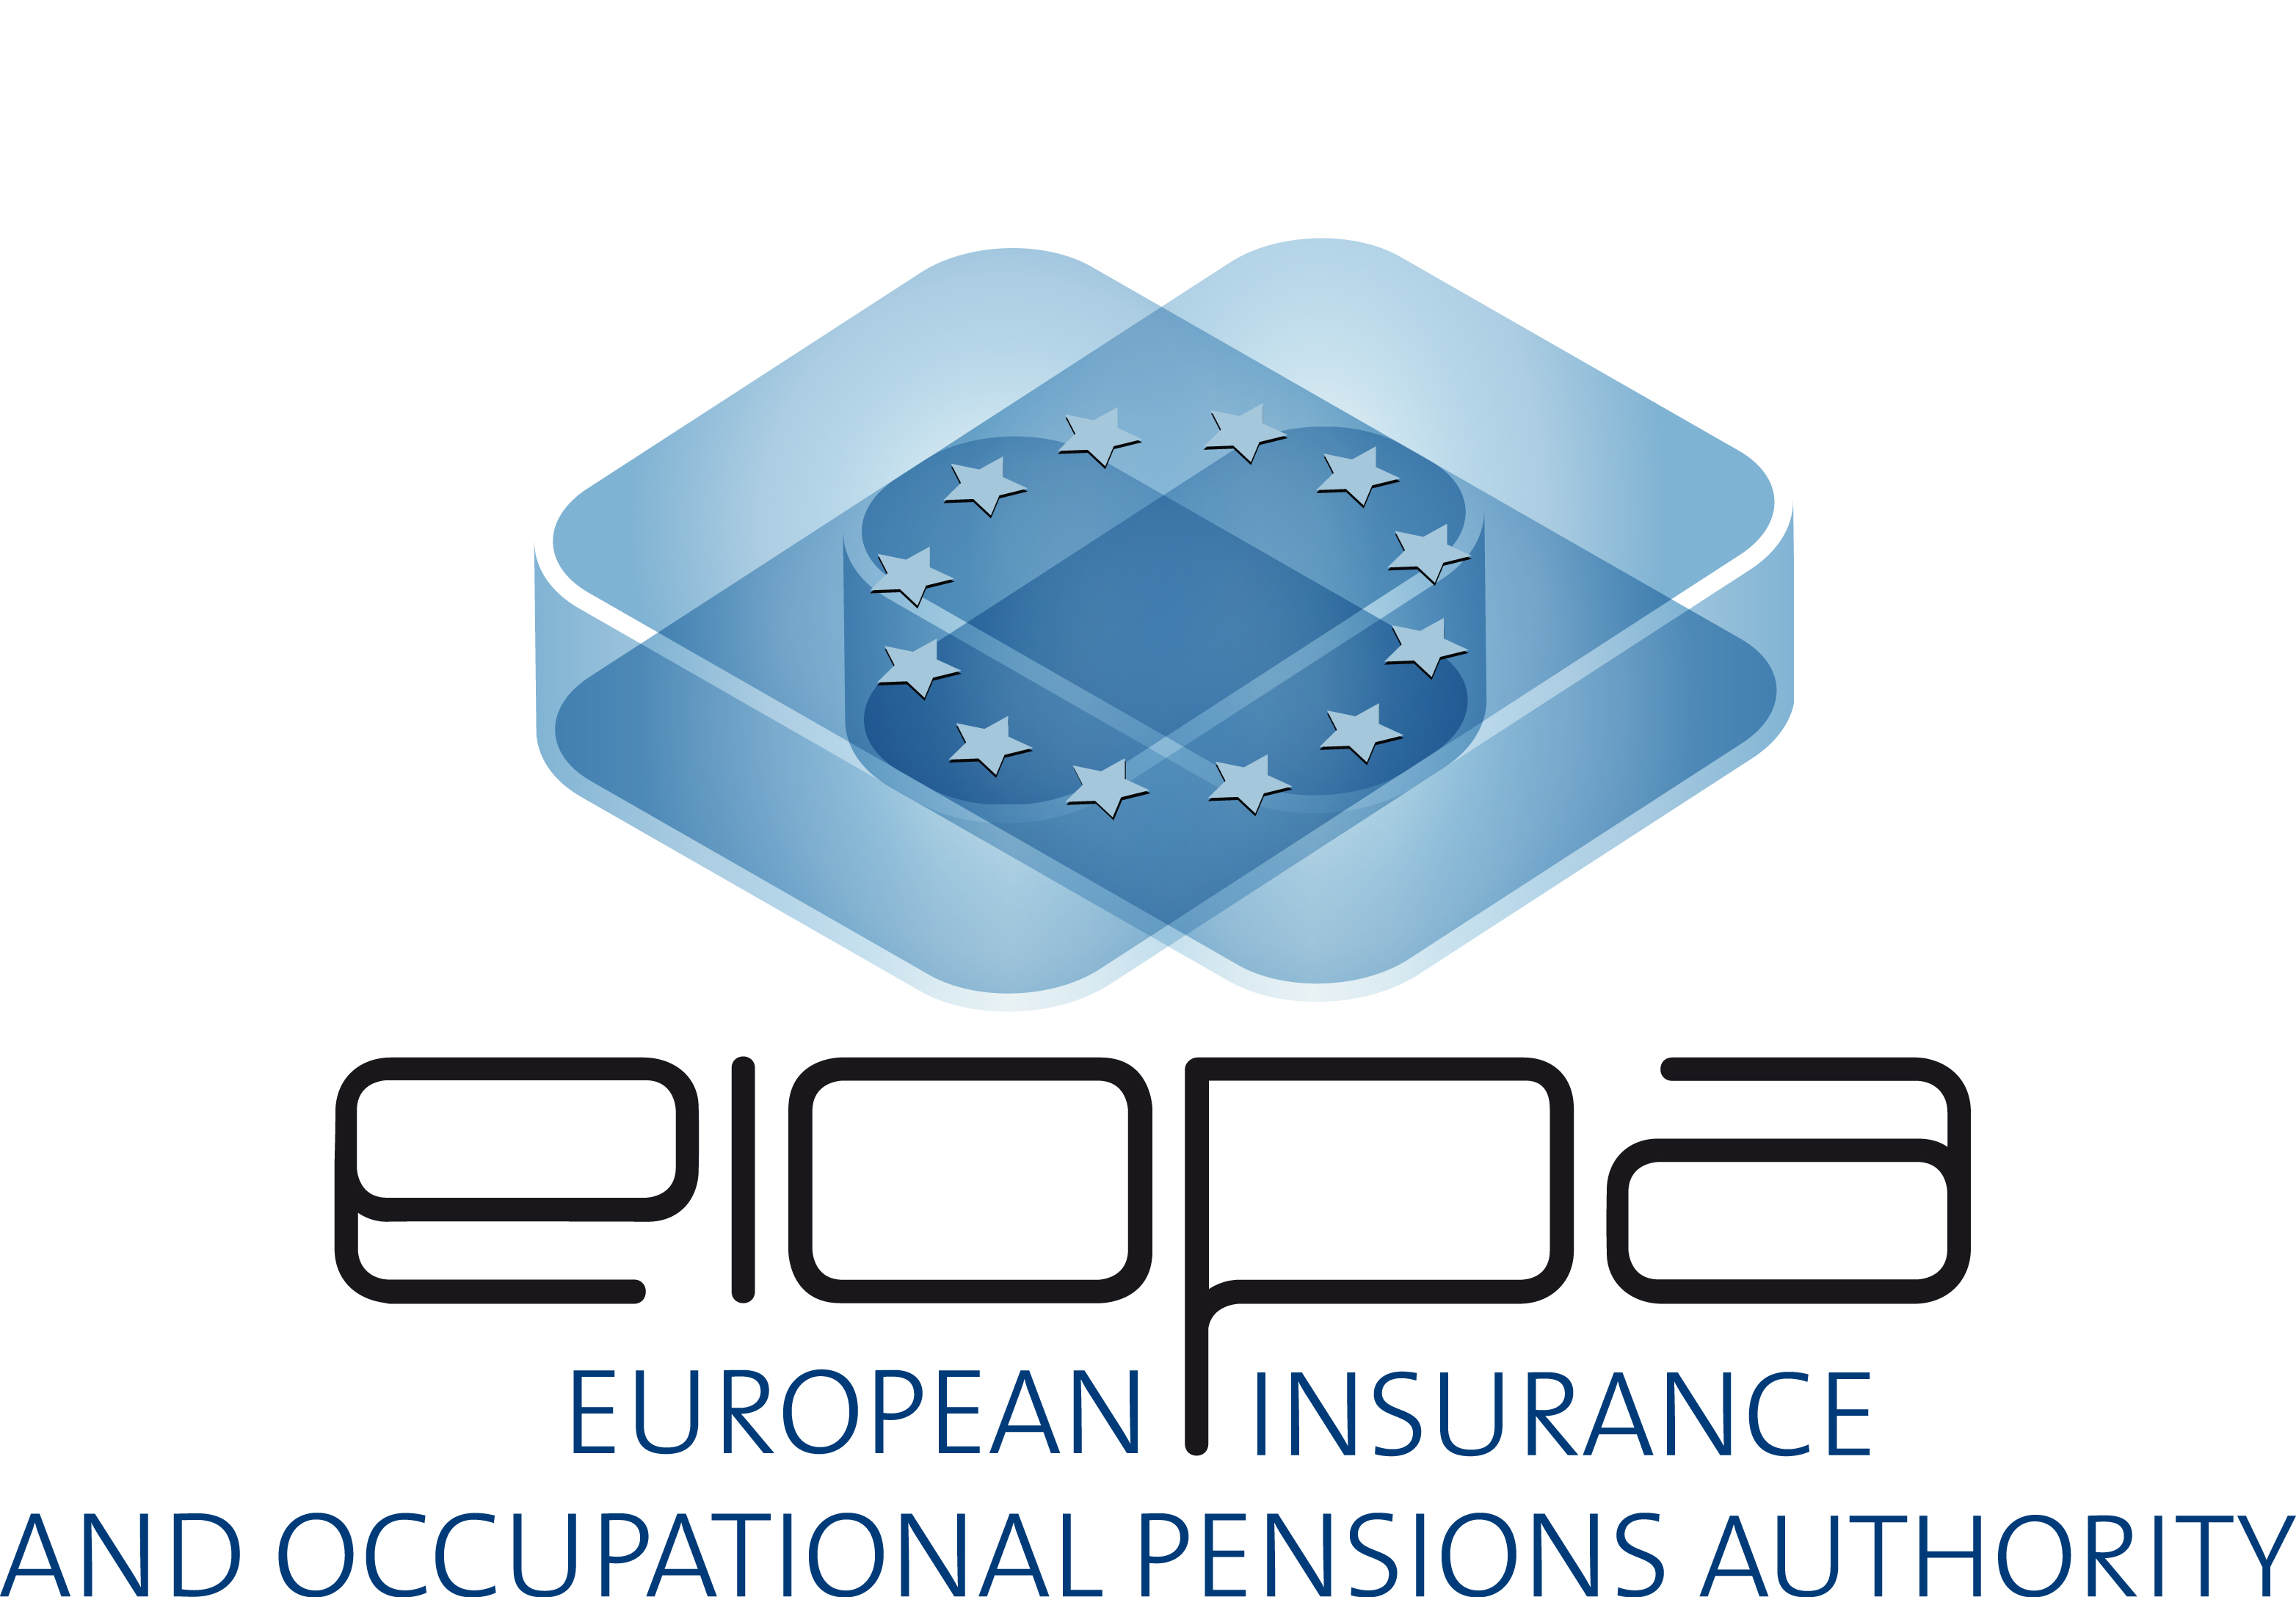 EIOPA European Insurance and Occupational Pensions Authority